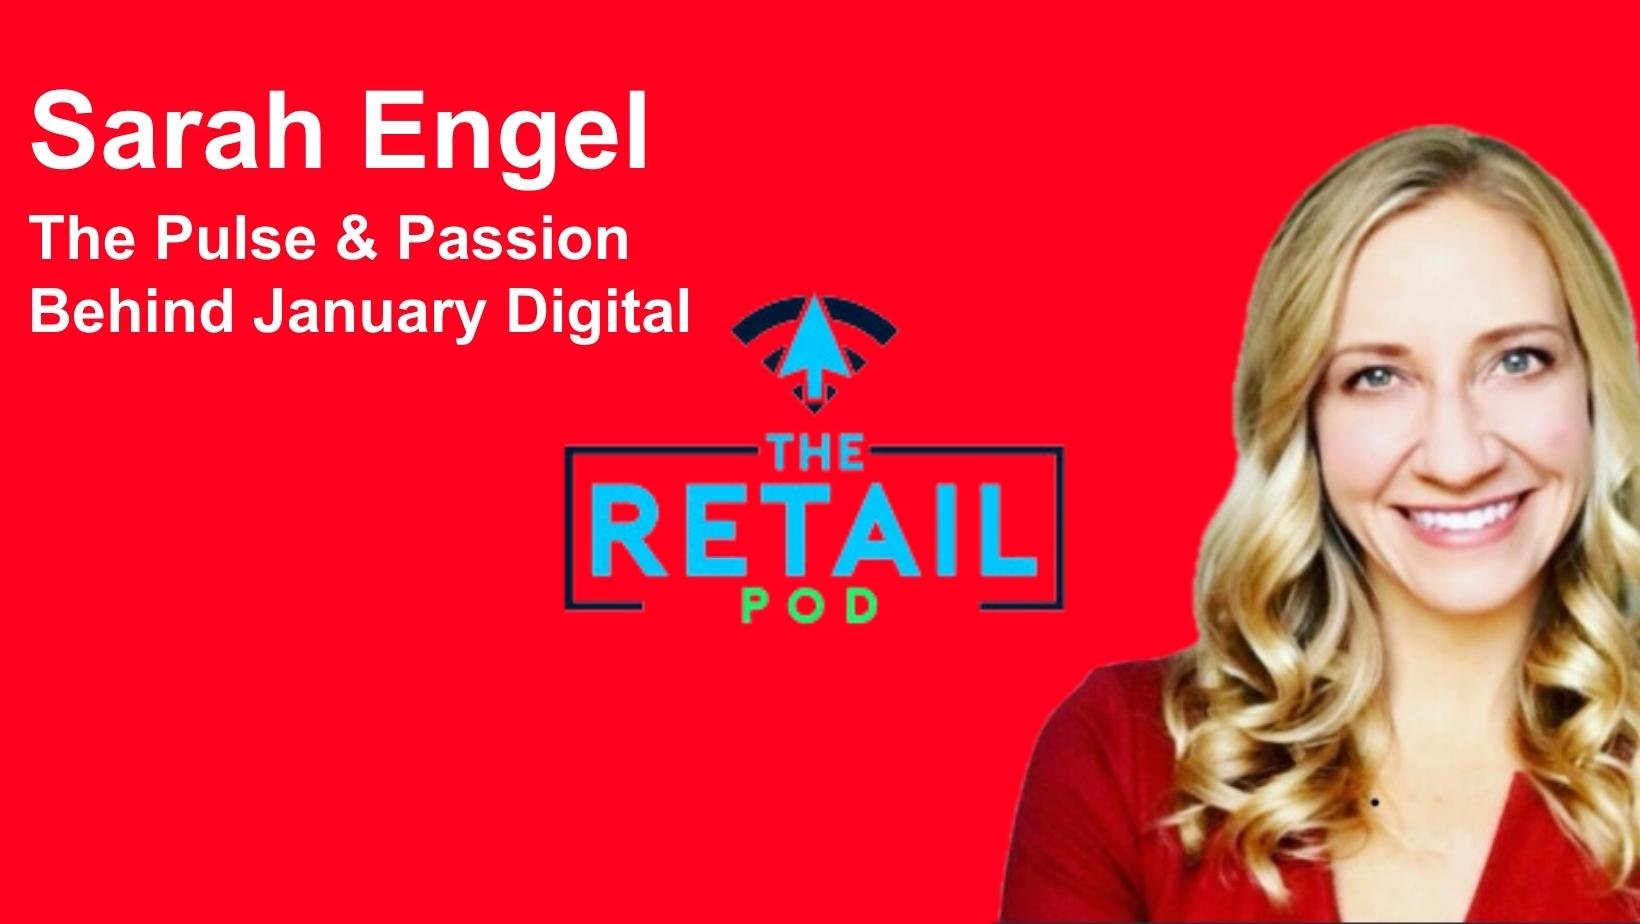 The Pulse & Passion Behind January Digital